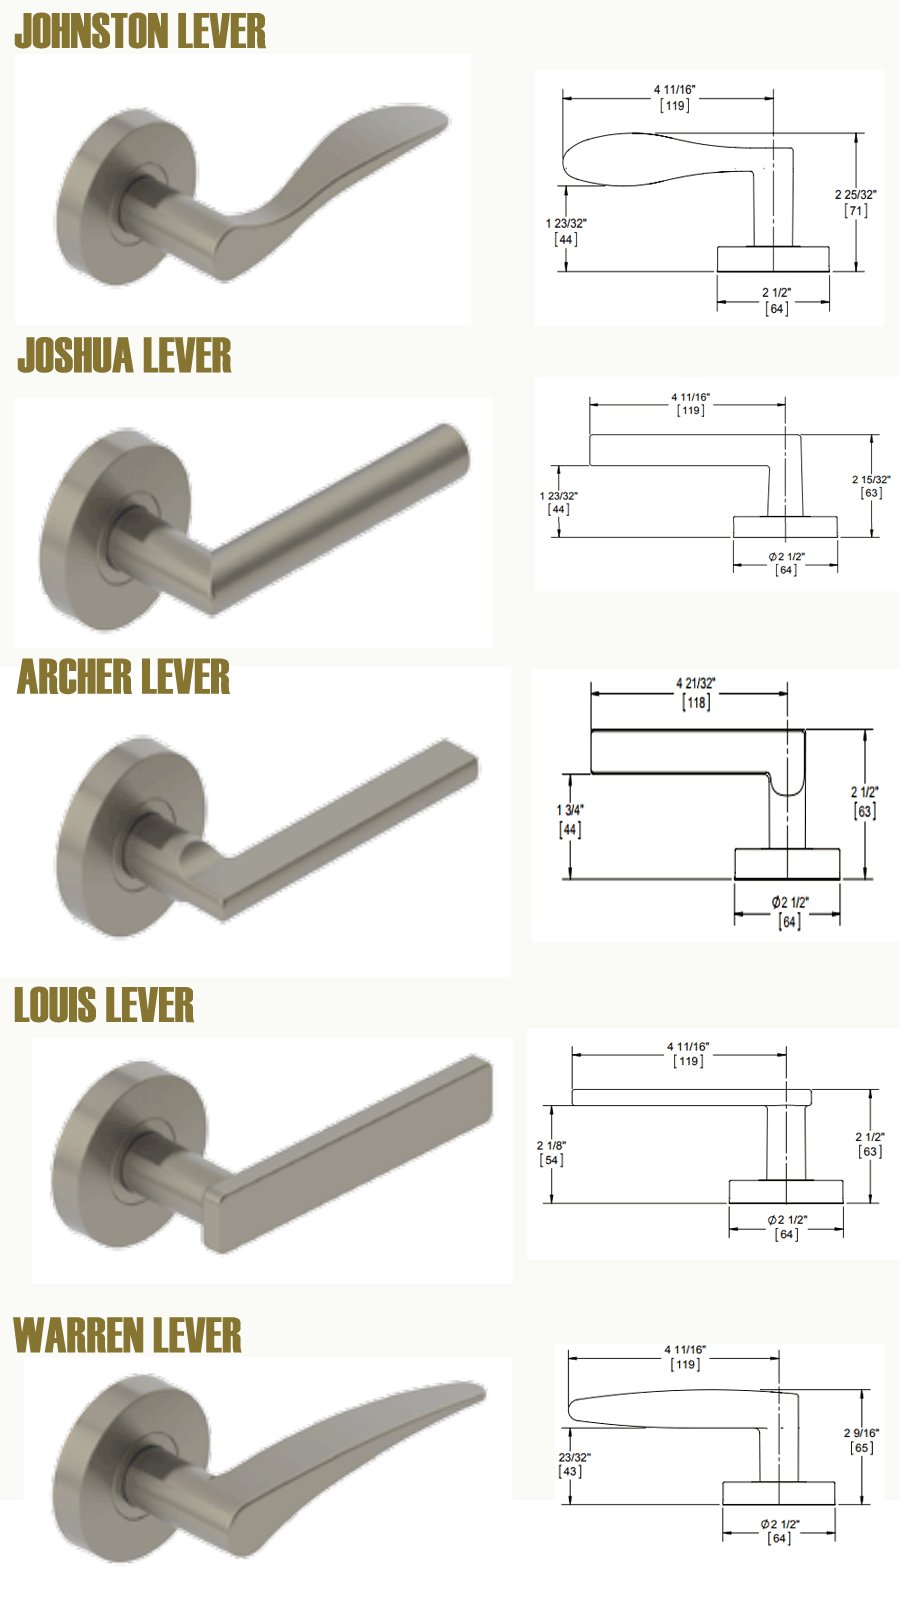 Hager 2300 Series lever and knob options; Lead lined and Tactile warning.